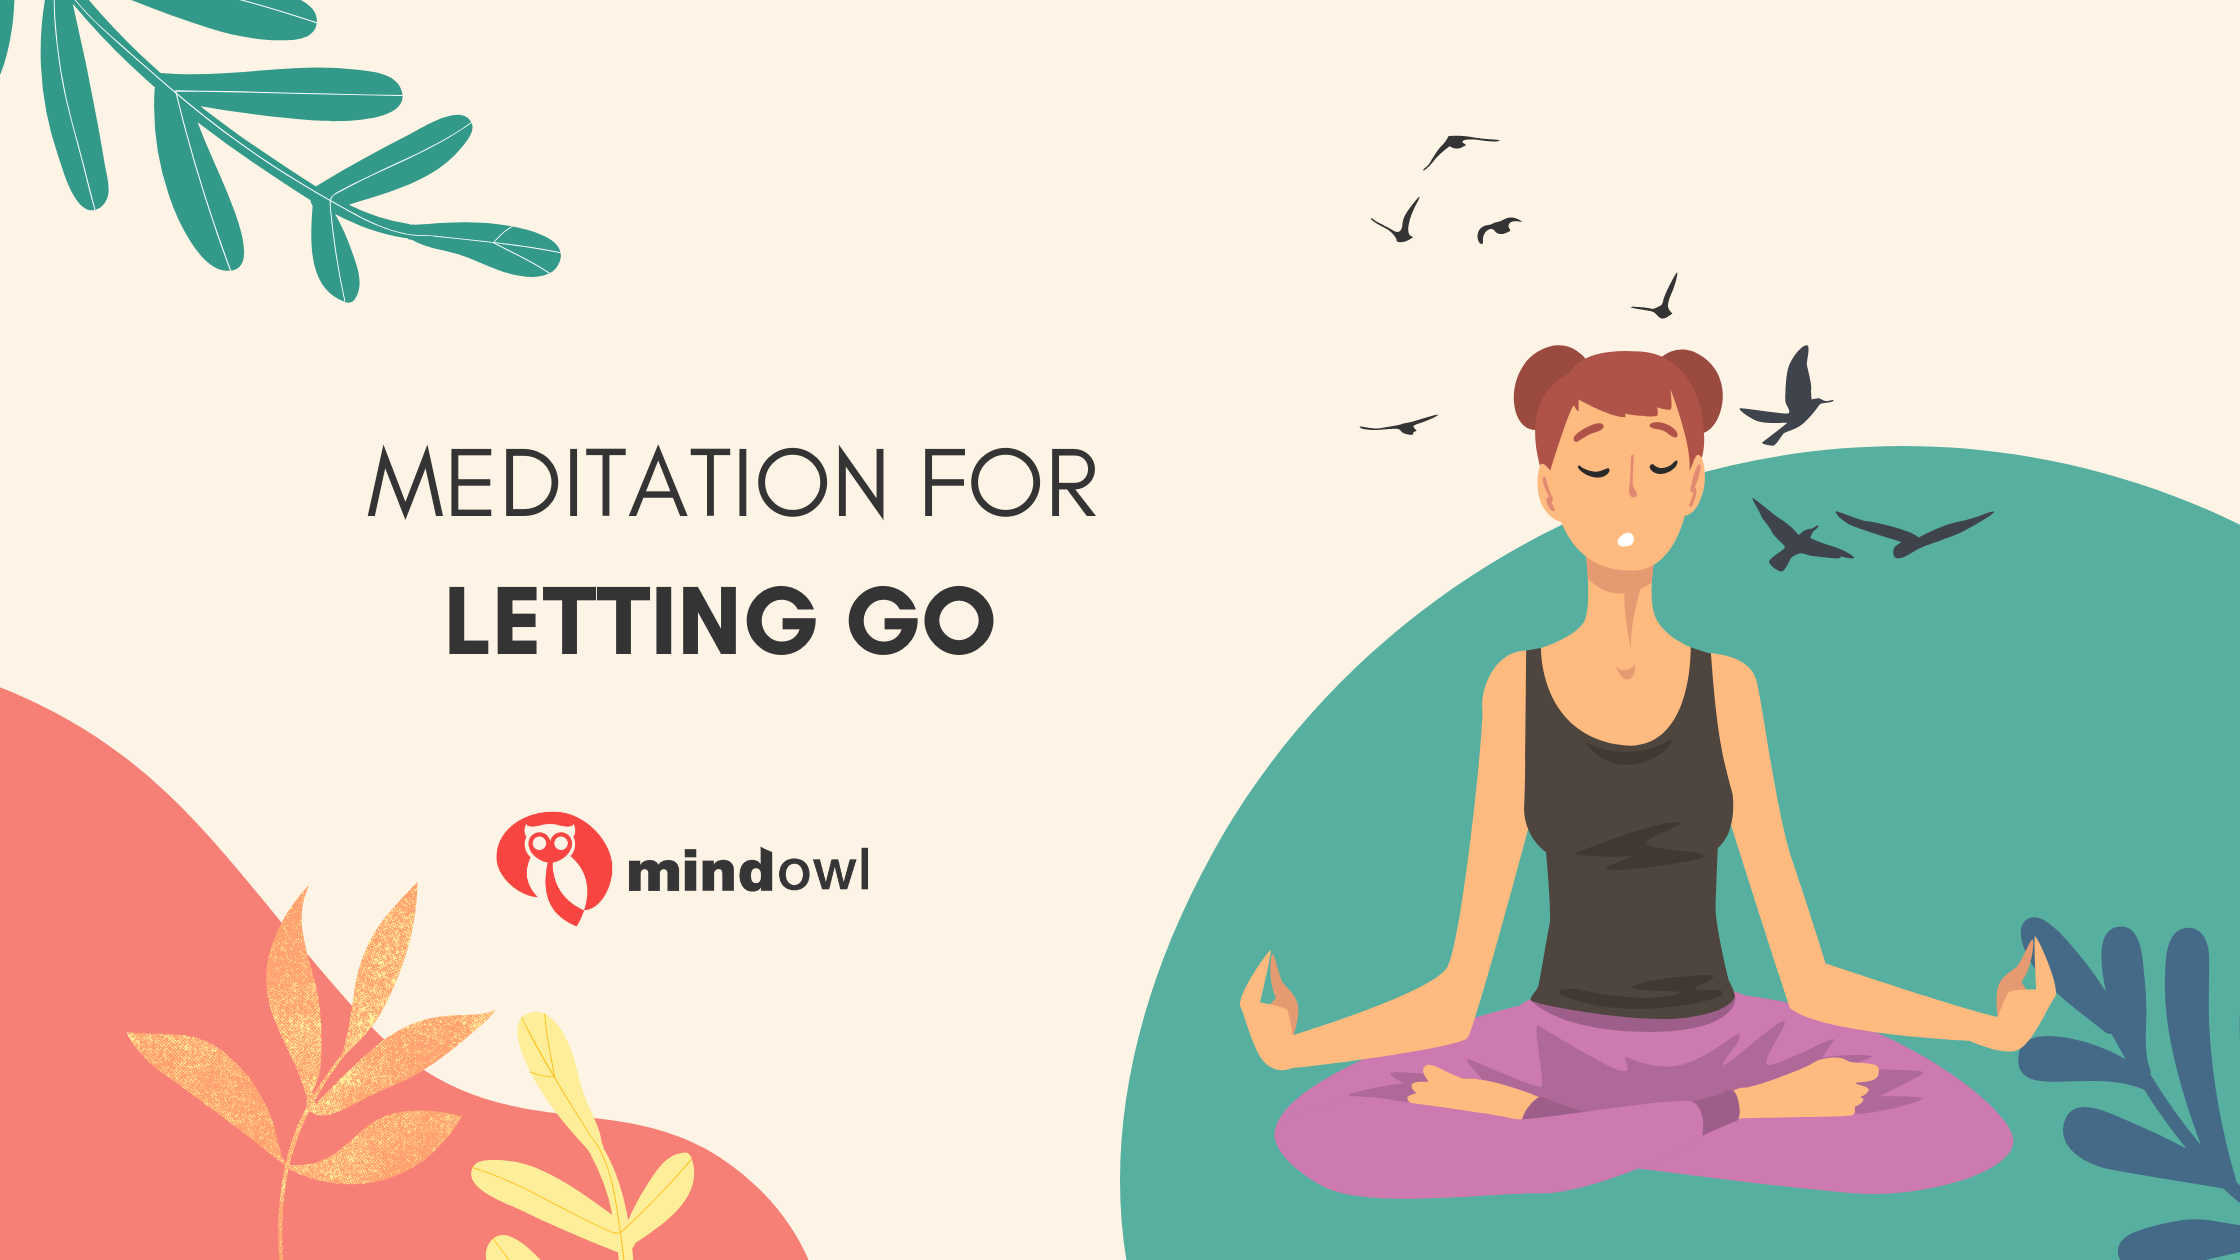 Letting Go: How to Use Meditation to let go of difficult emotions